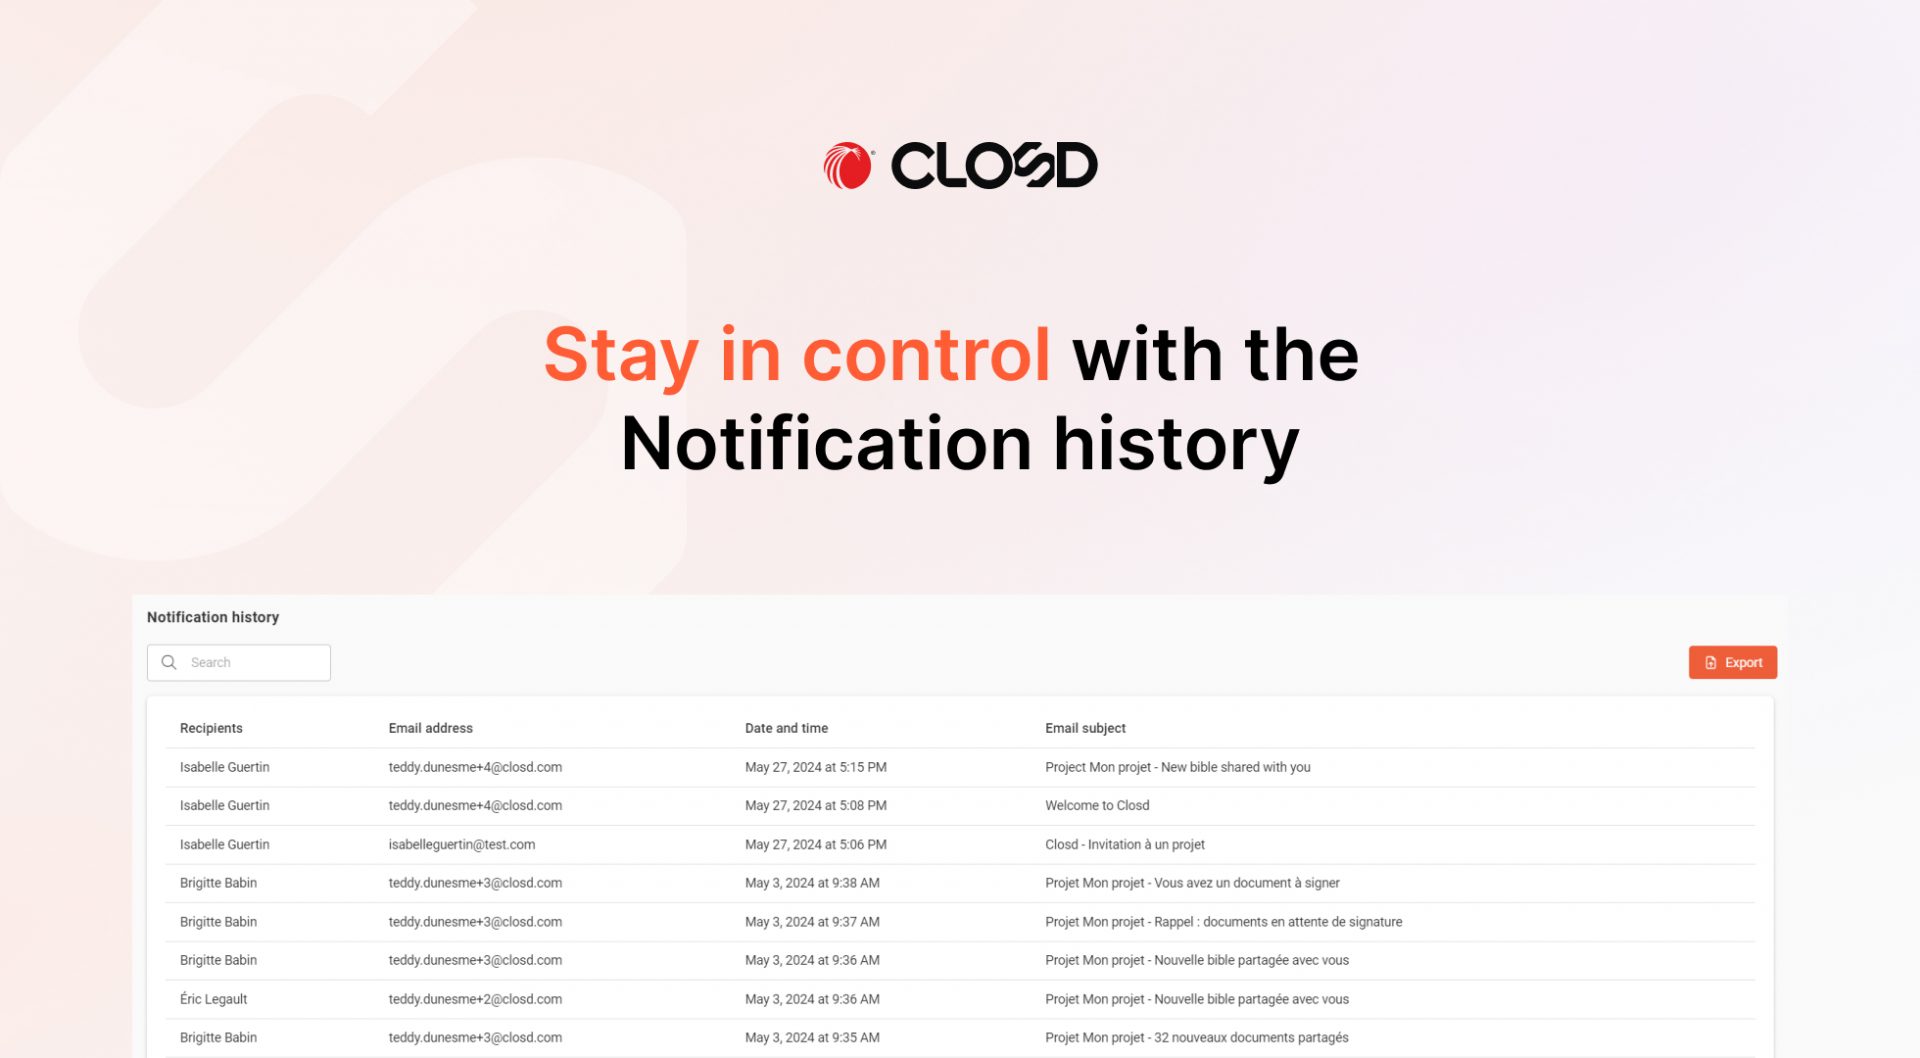 Discover the Closd Notification history